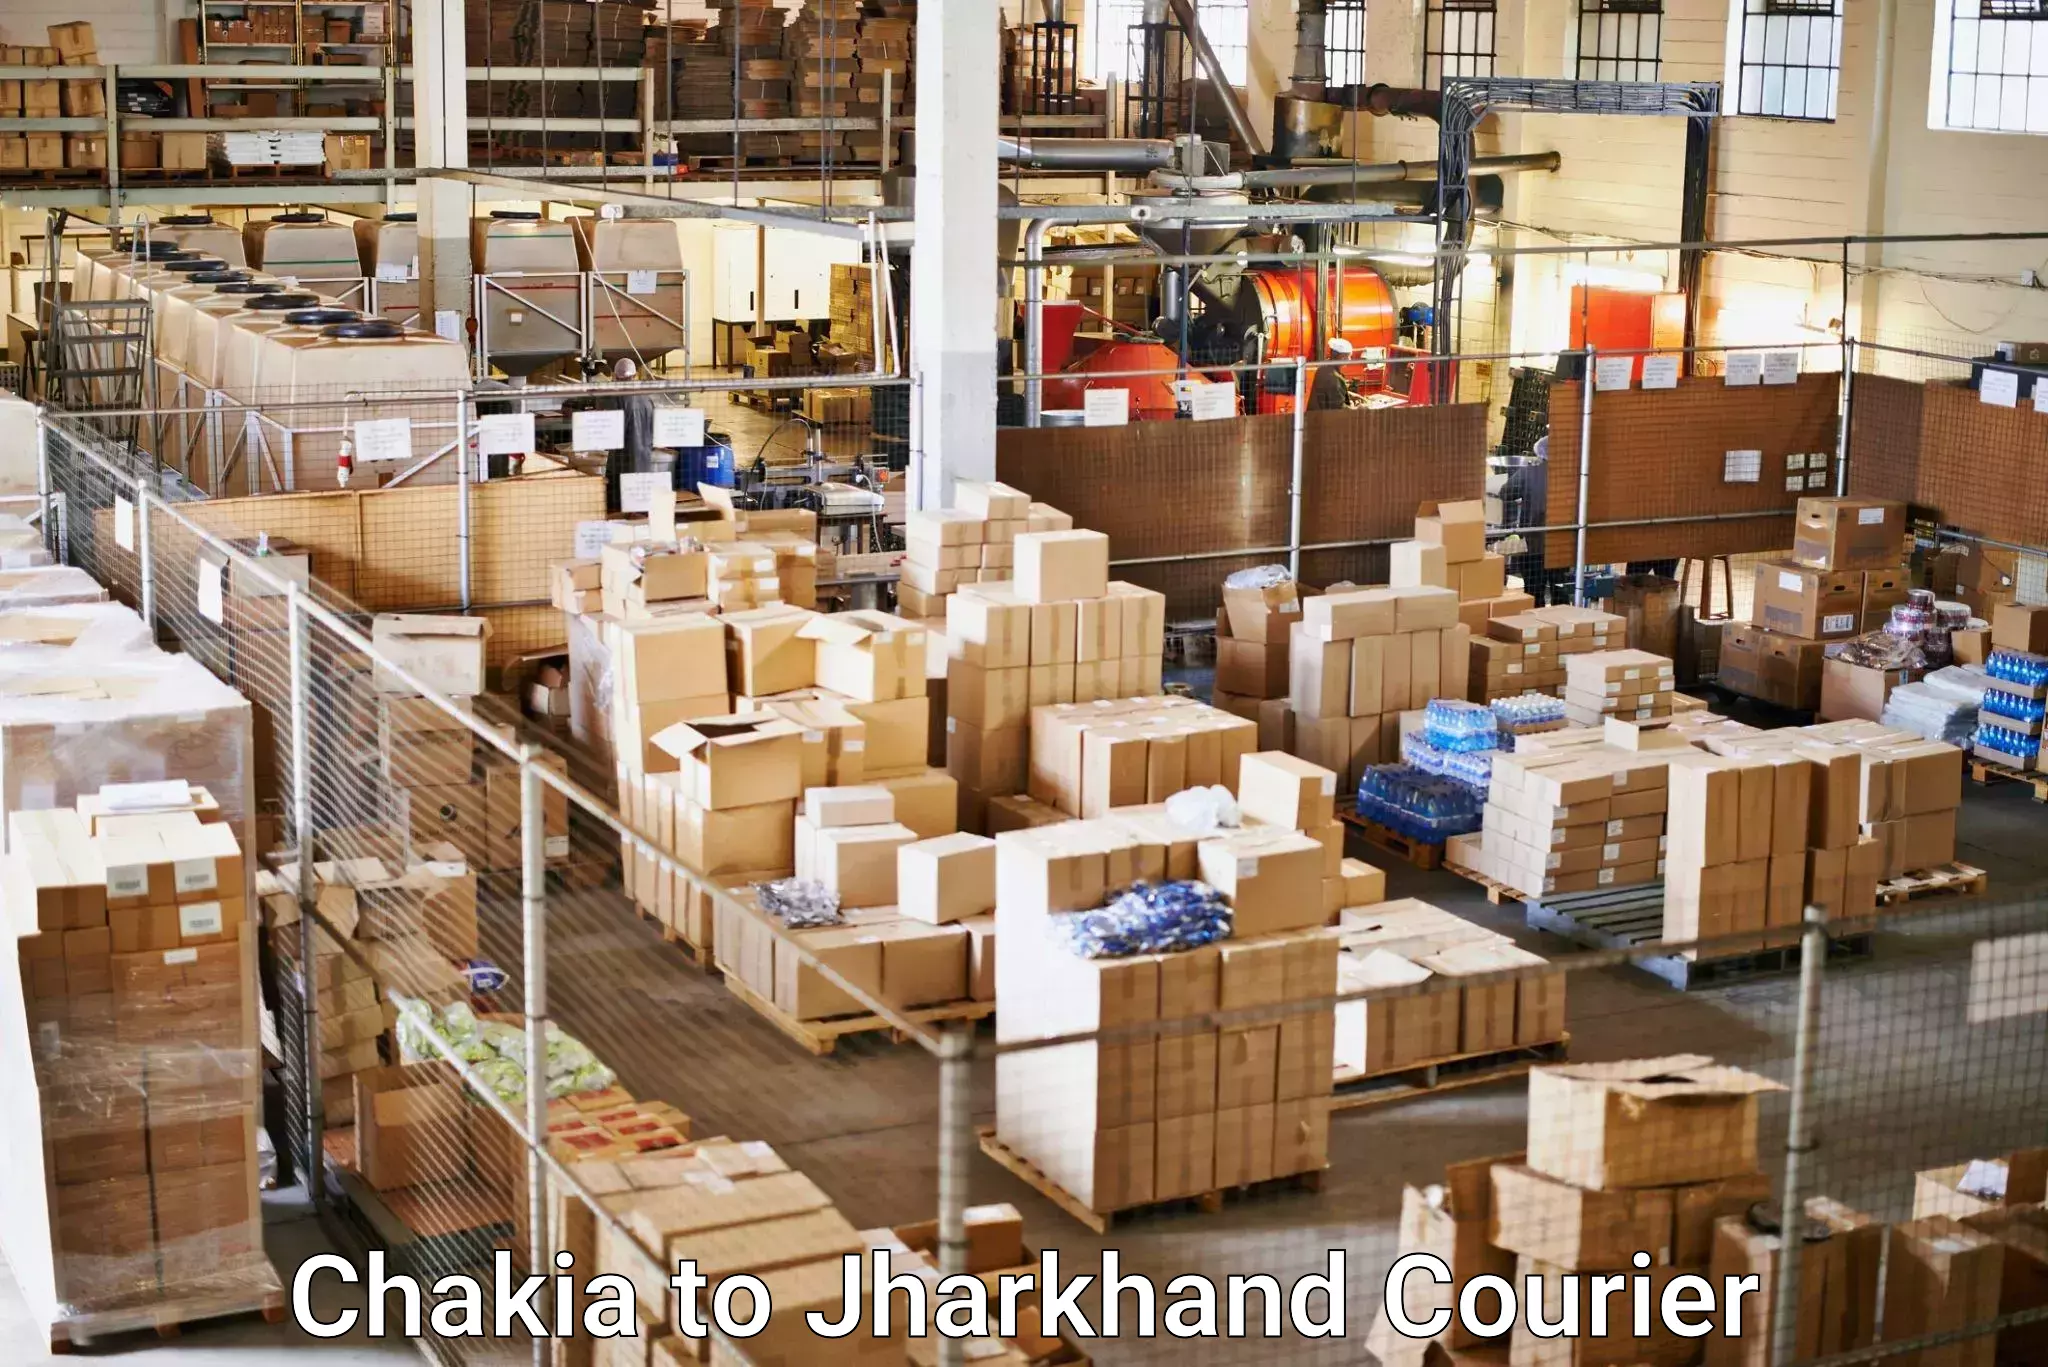 Efficient order fulfillment in Chakia to Jharkhand